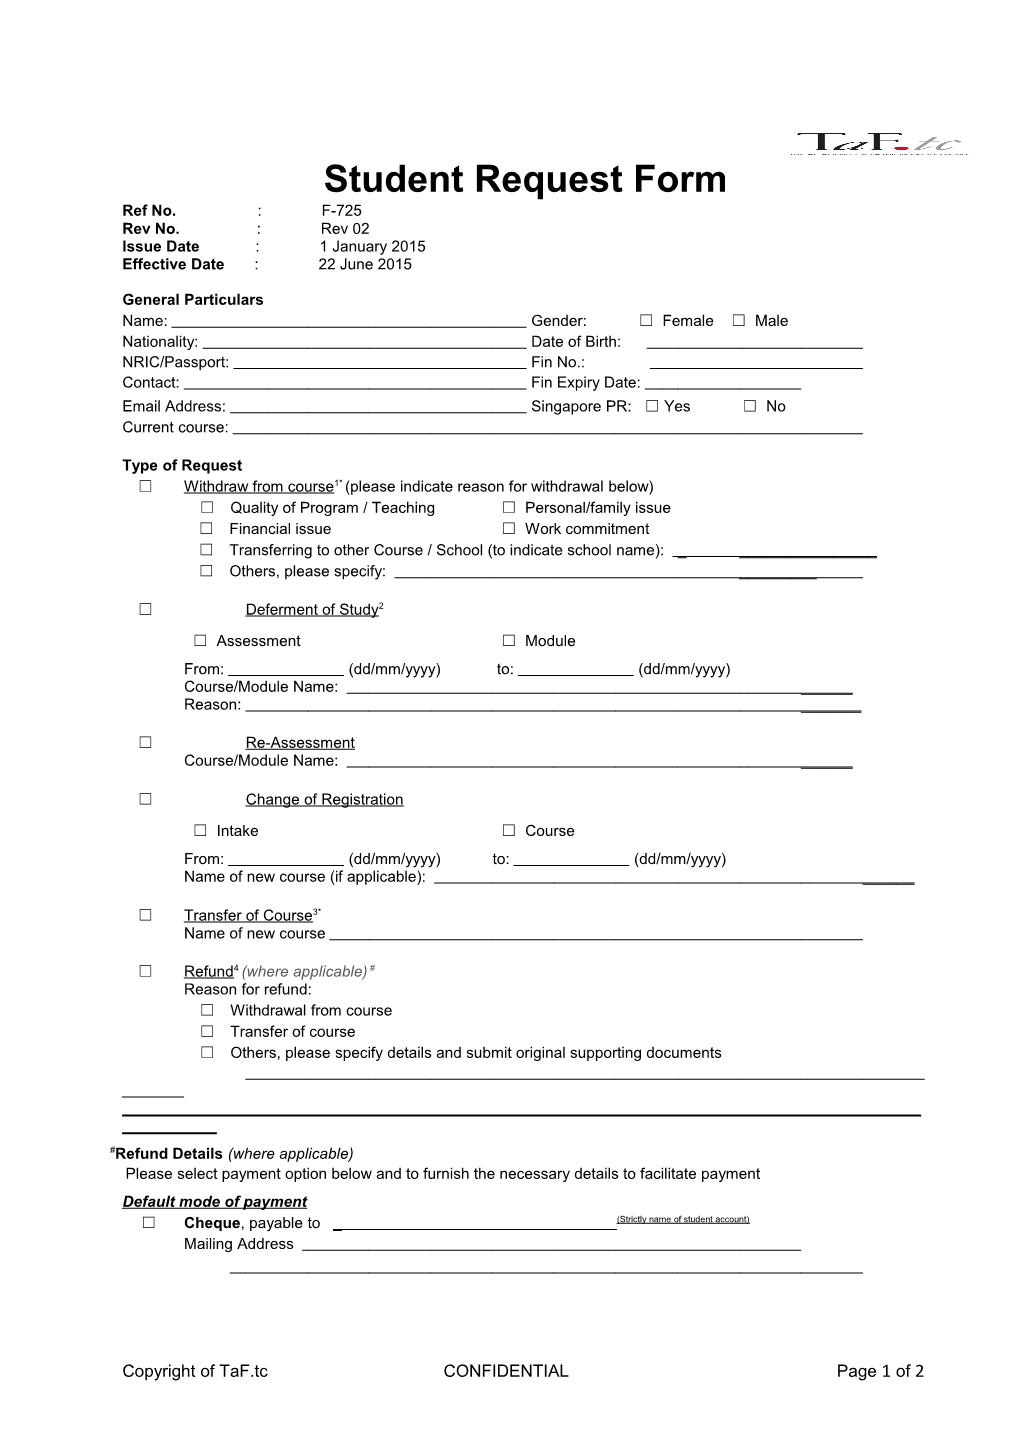 Student Request Form